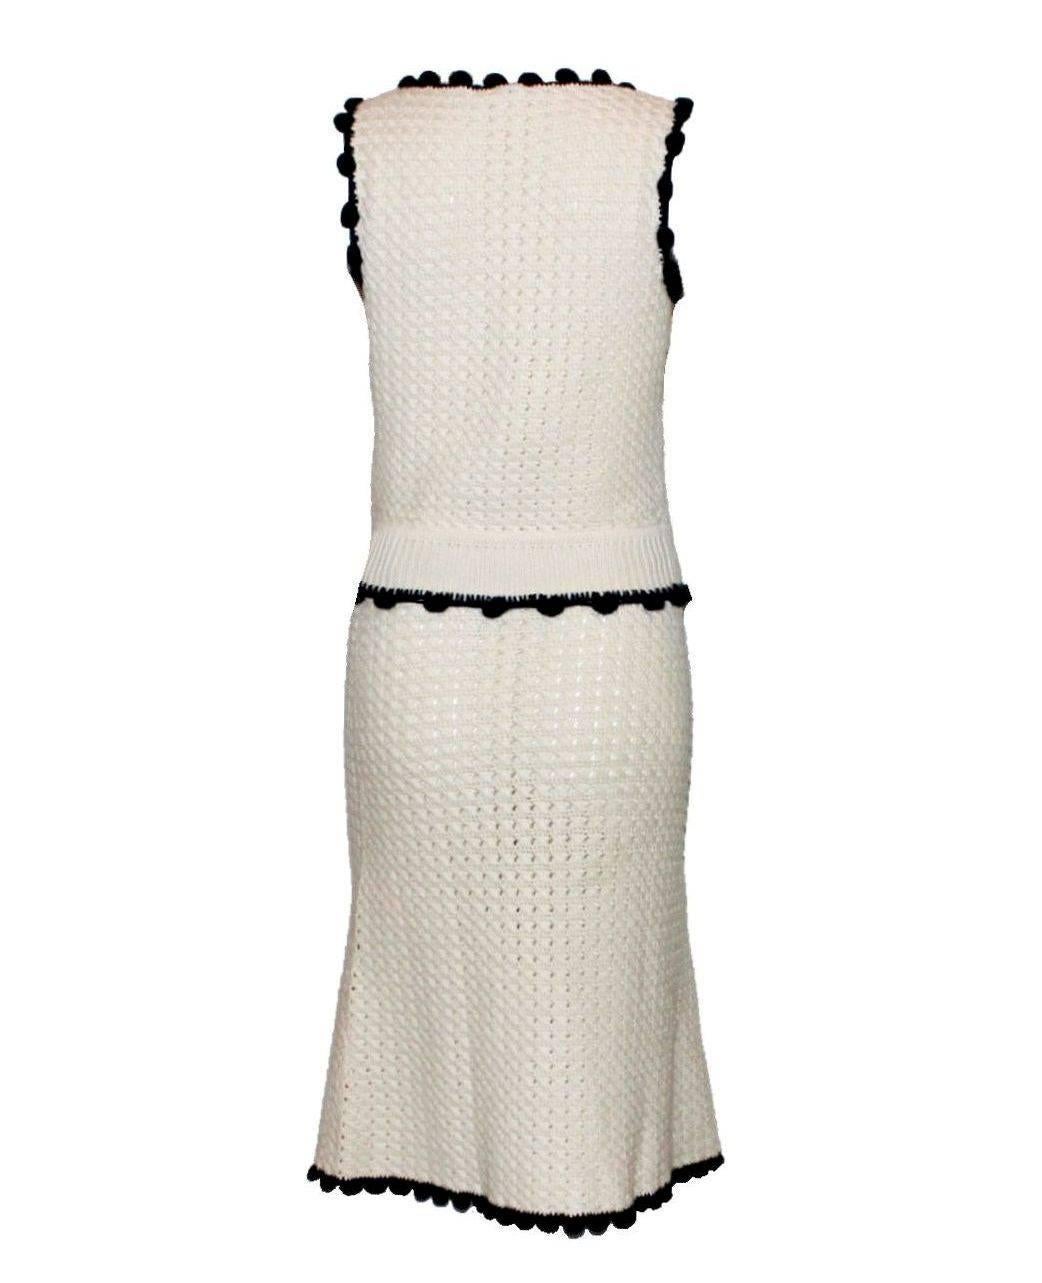 A stunning Chanel Ensemble
Consisting of a top and matching skirt
Can be worn together as a complete outfit or separate
Beautiful crochet knit 
A true Chanel signature piece in the famous signature design
Soft ivory knit with dark contrast